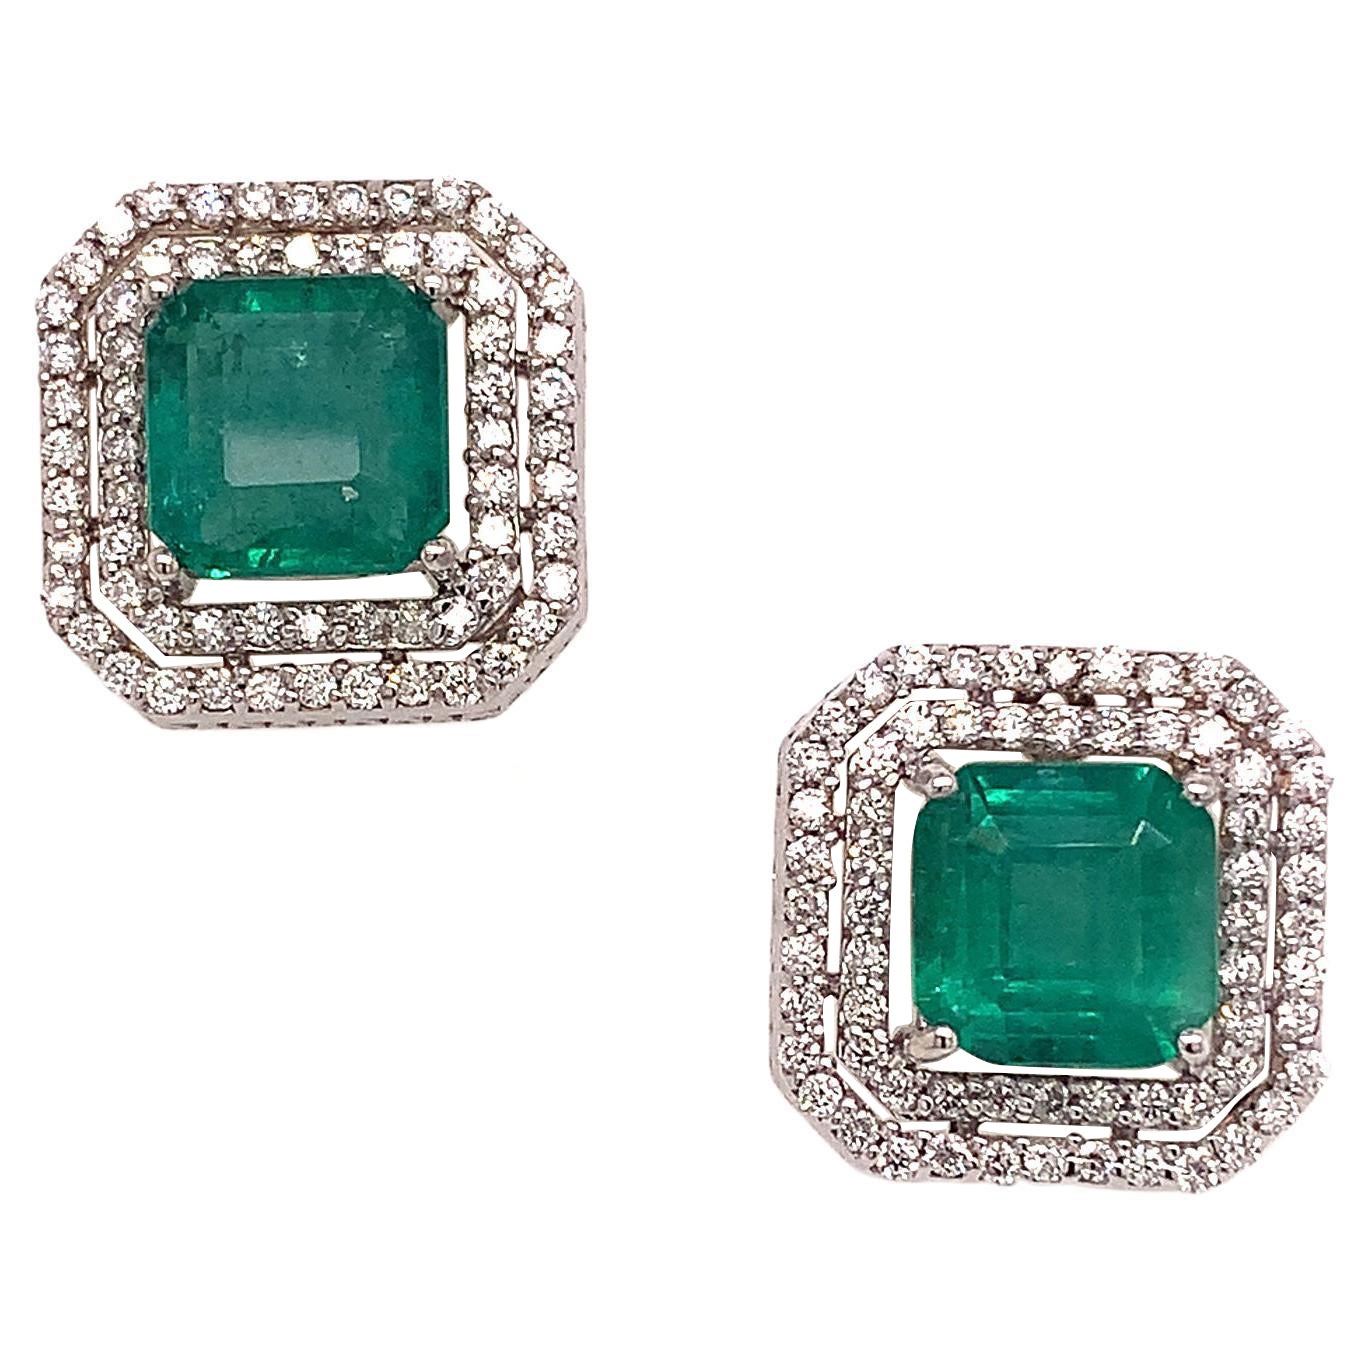 Natural Emerald Diamond Earrings 14k Gold 4.72 Tcw Certified For Sale